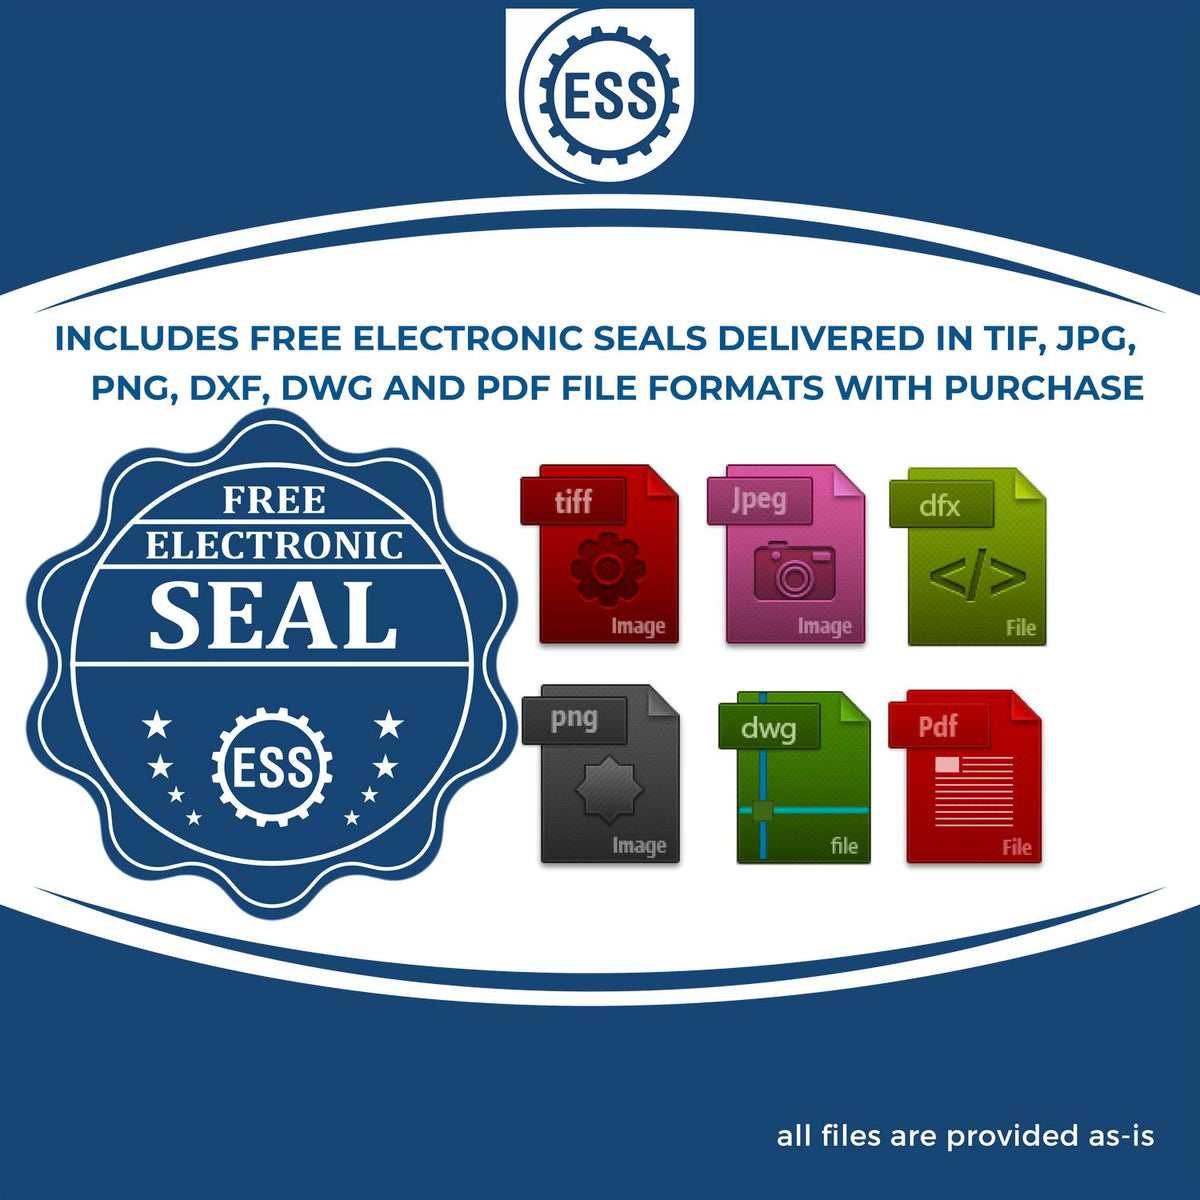 An infographic for the free electronic seal for the Heavy Duty Cast Iron Connecticut Land Surveyor Seal Embosser illustrating the different file type icons such as DXF, DWG, TIF, JPG and PNG.